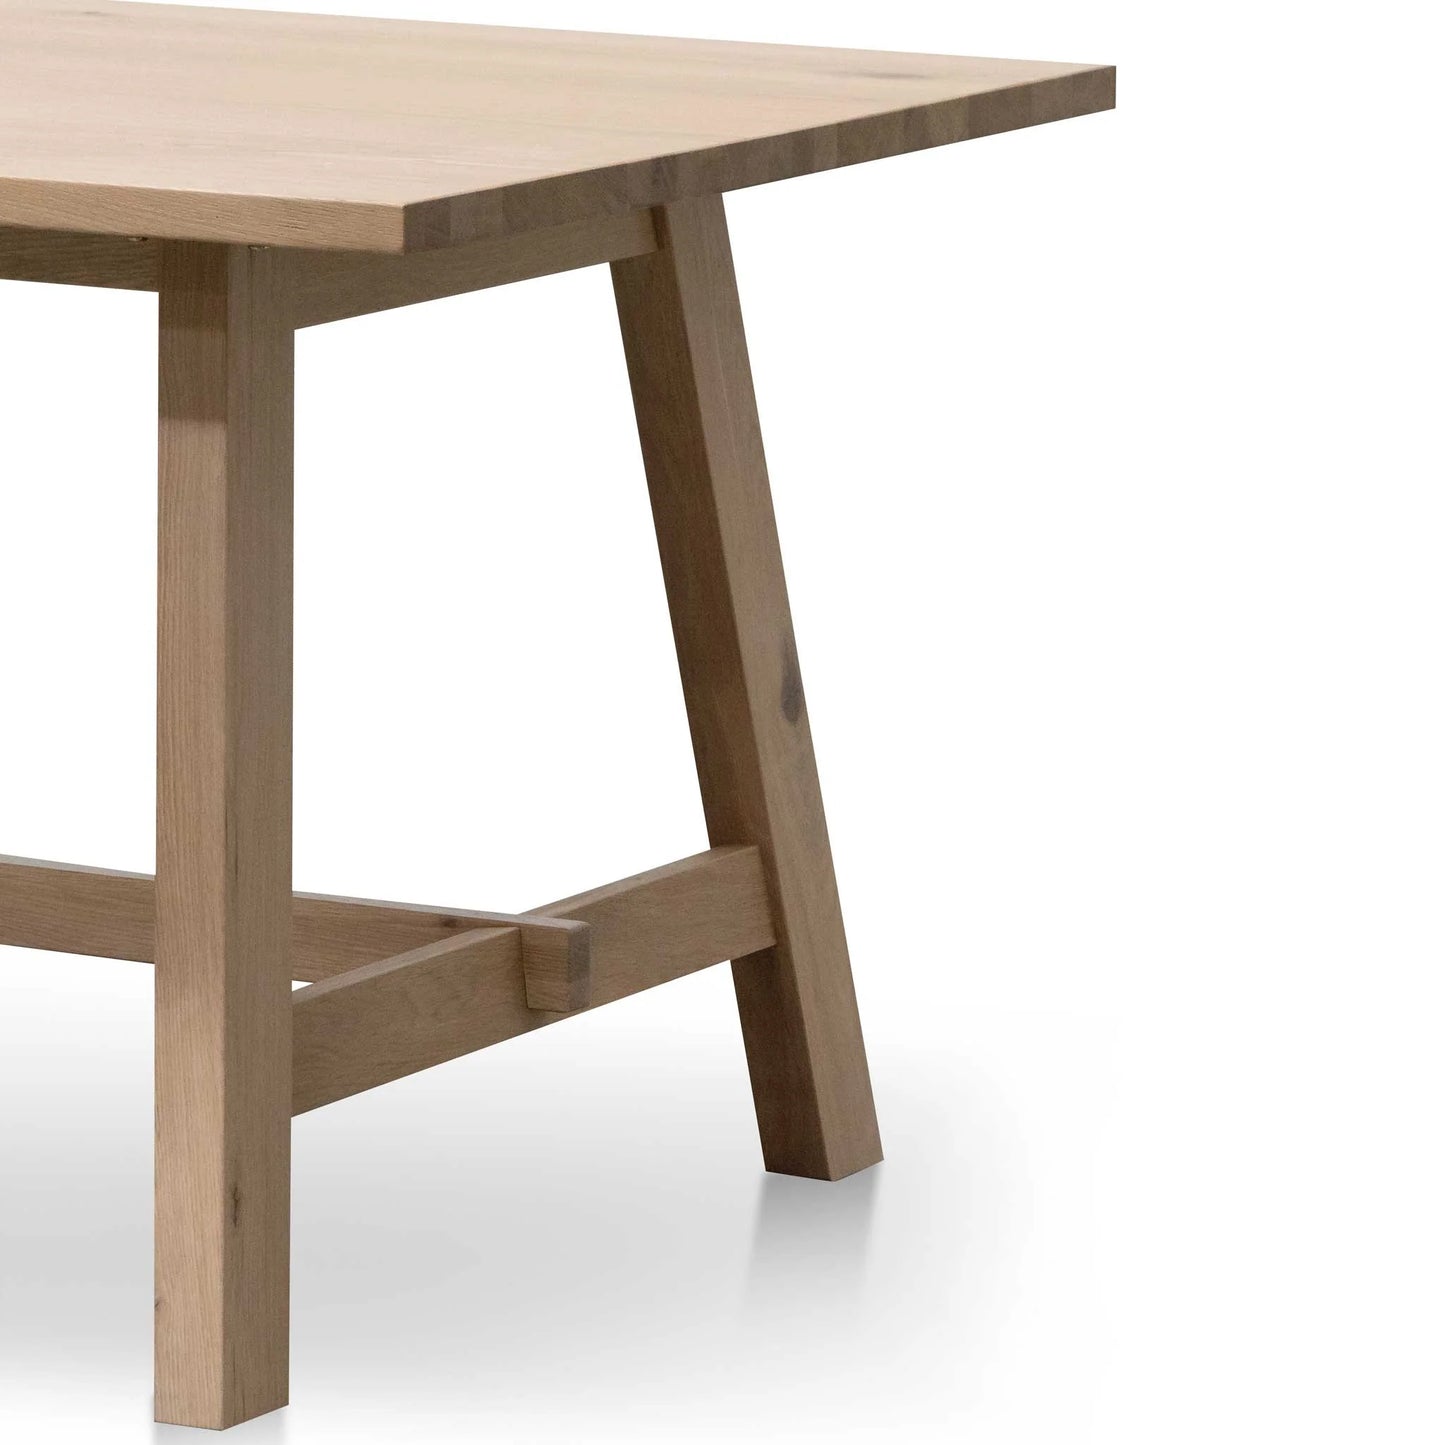 Clements | Washed Natural 2.2m Rectangular Dining Table